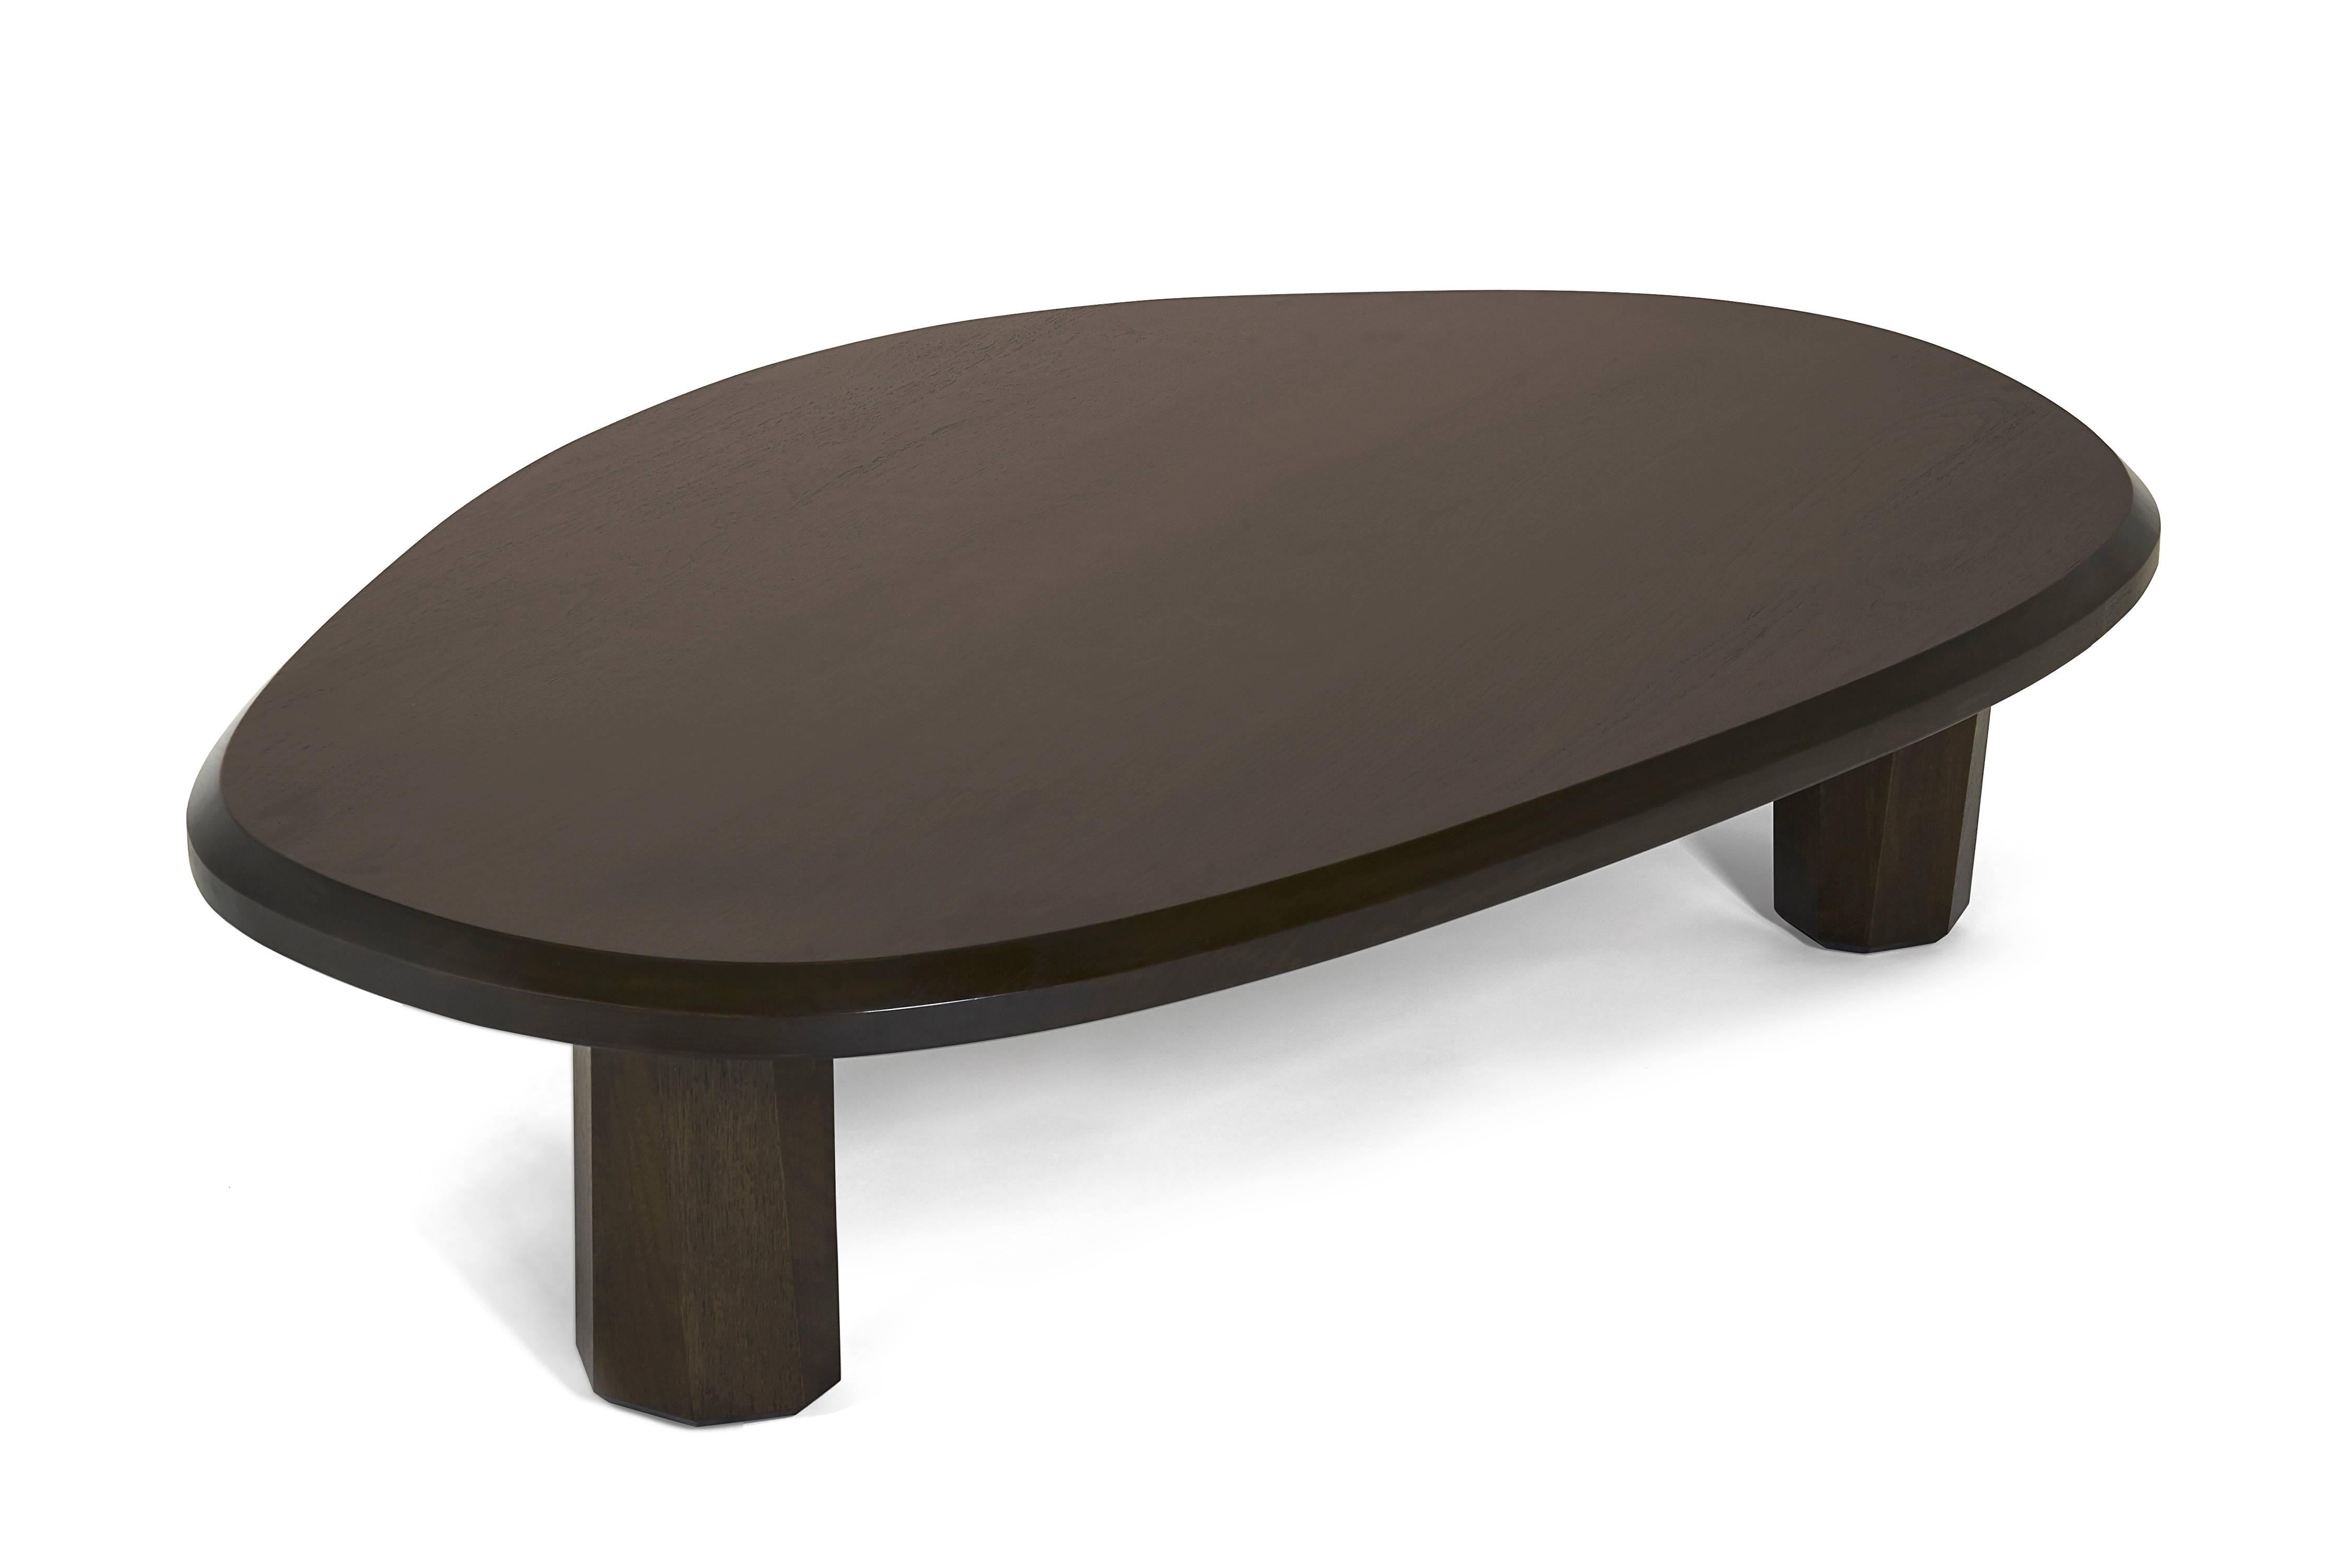 American Alto Coffee Table Solid walnut, shaped with 3 legs For Sale